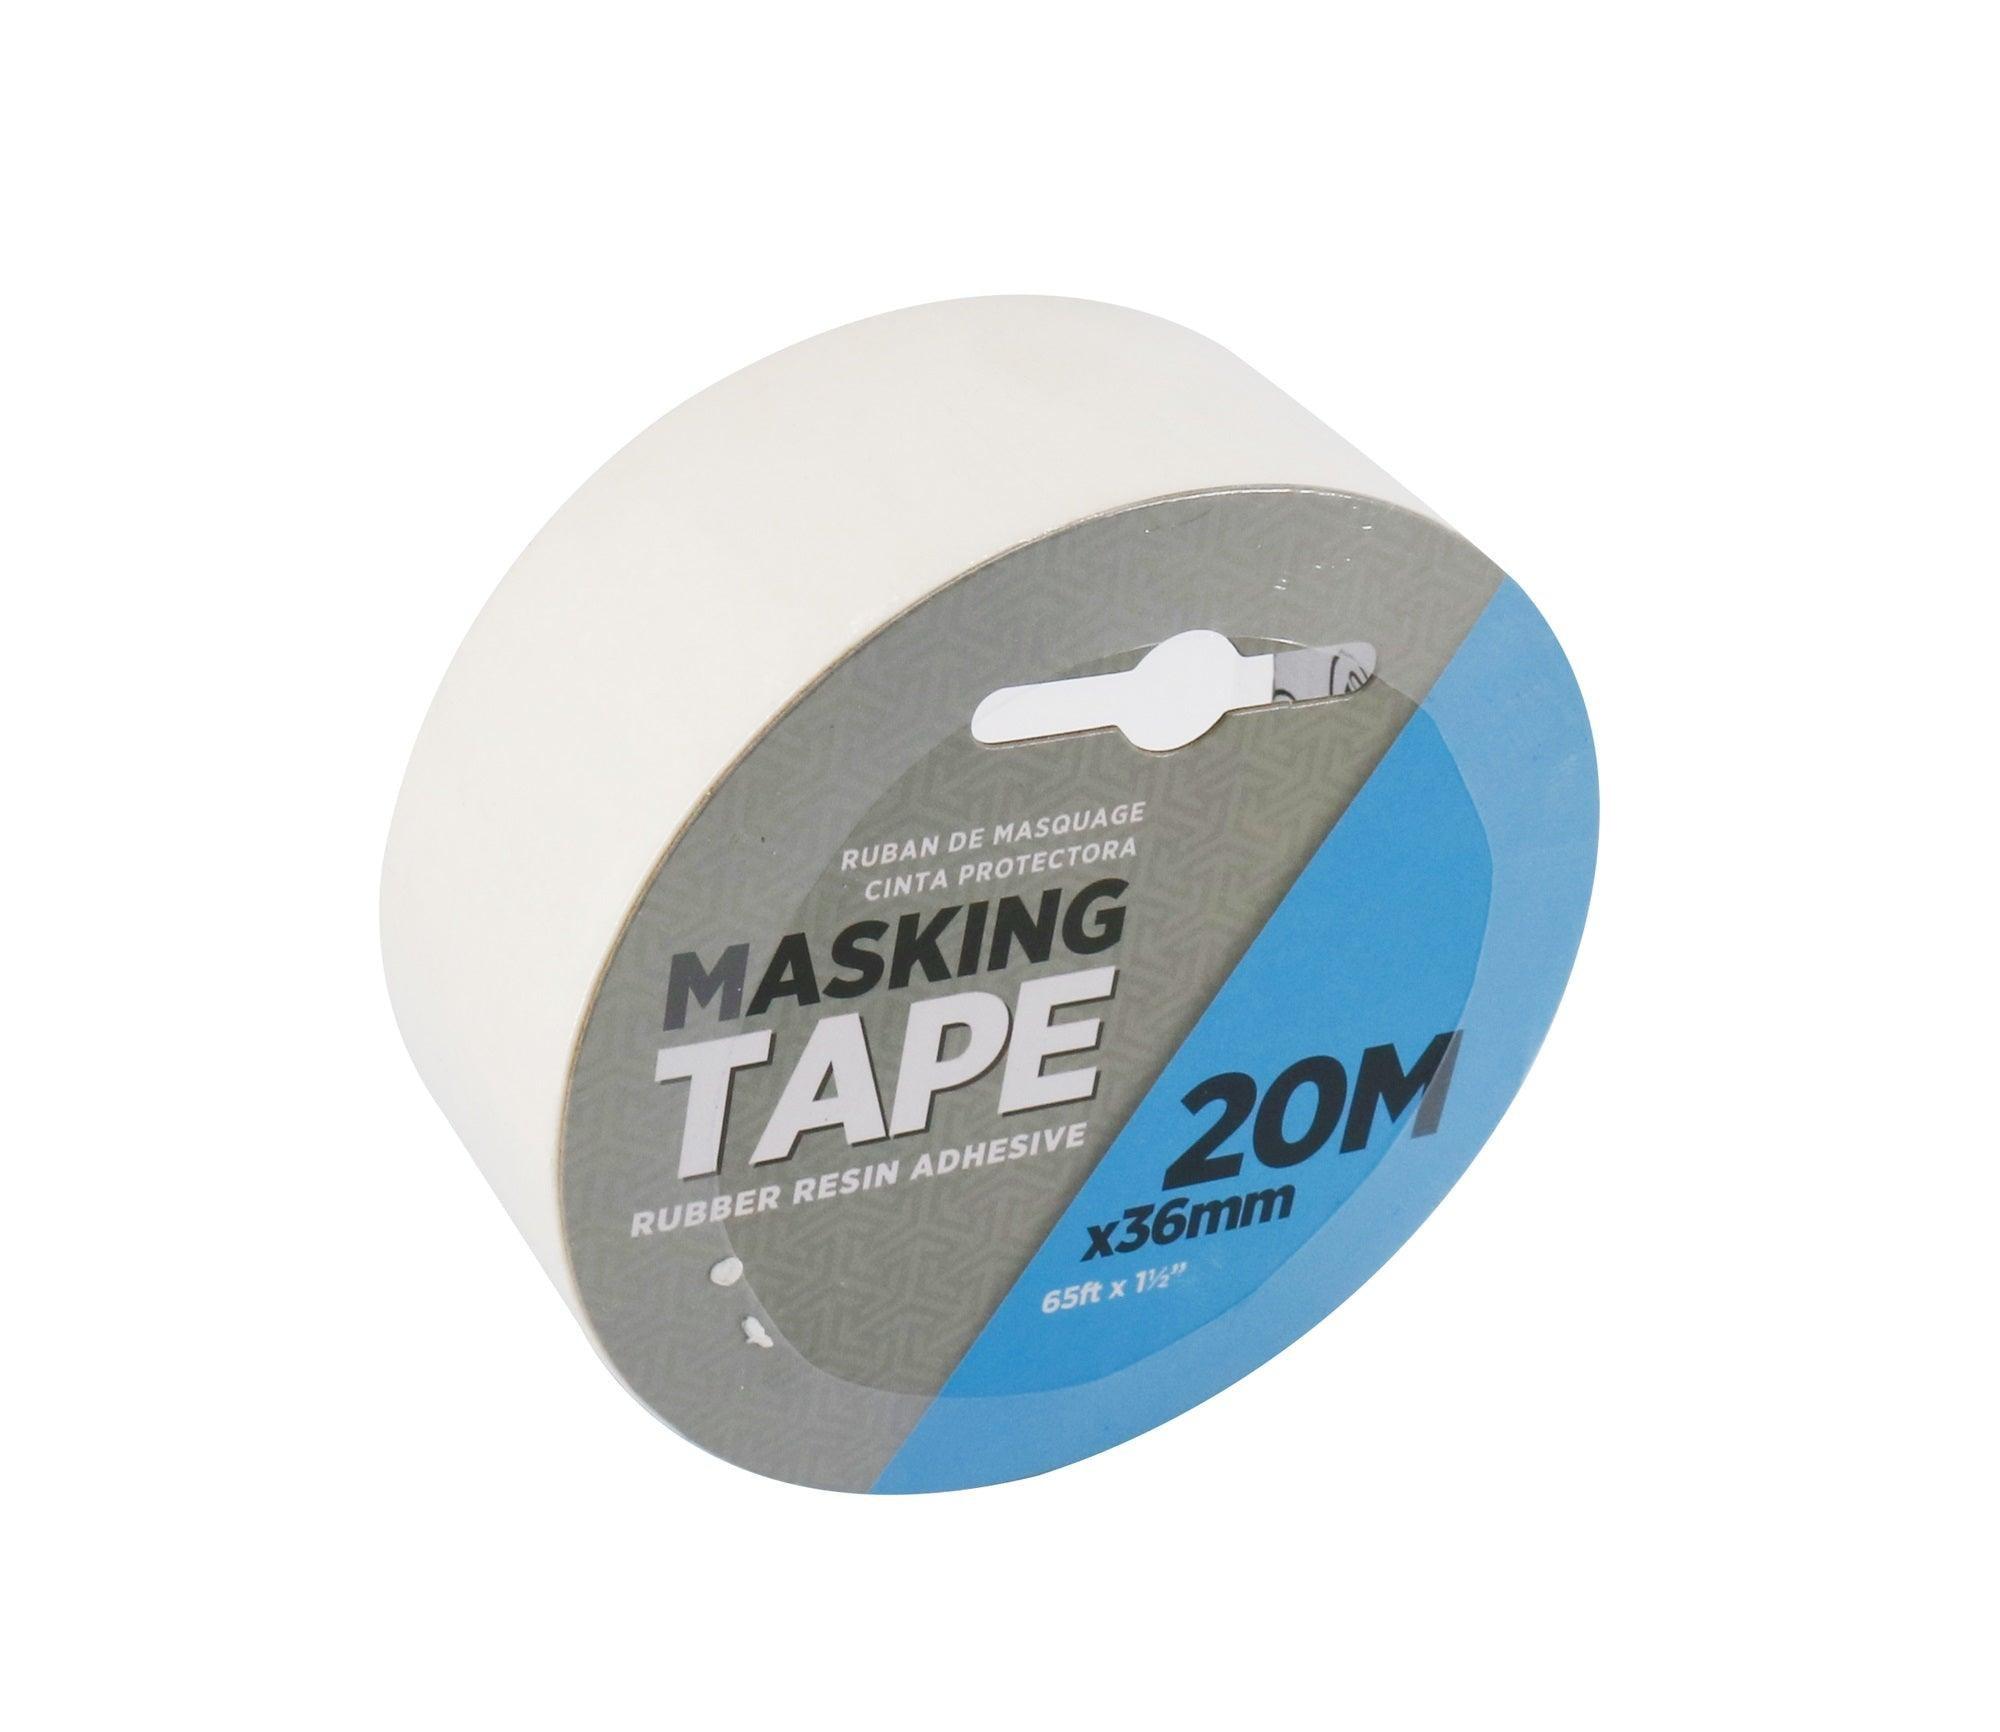 Masking Tape | 26m x 36mm - Choice Stores